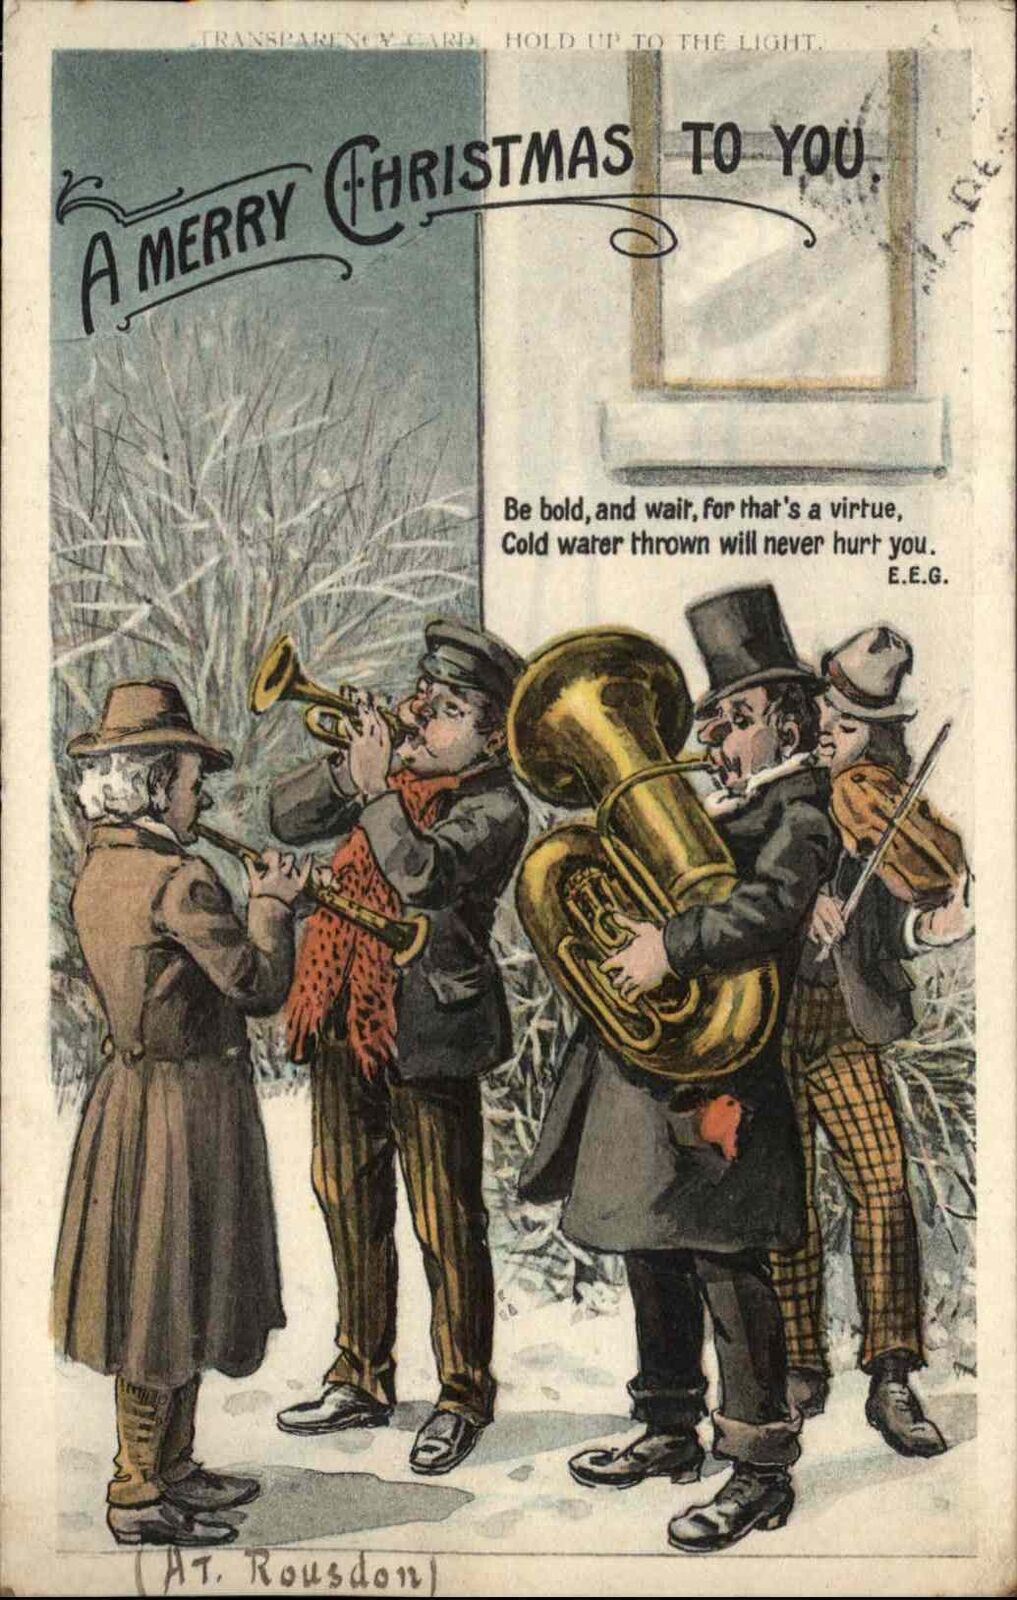 Christmas Musicians Hold to Light HTL Man Dumps Water From Window c1905 Postcard